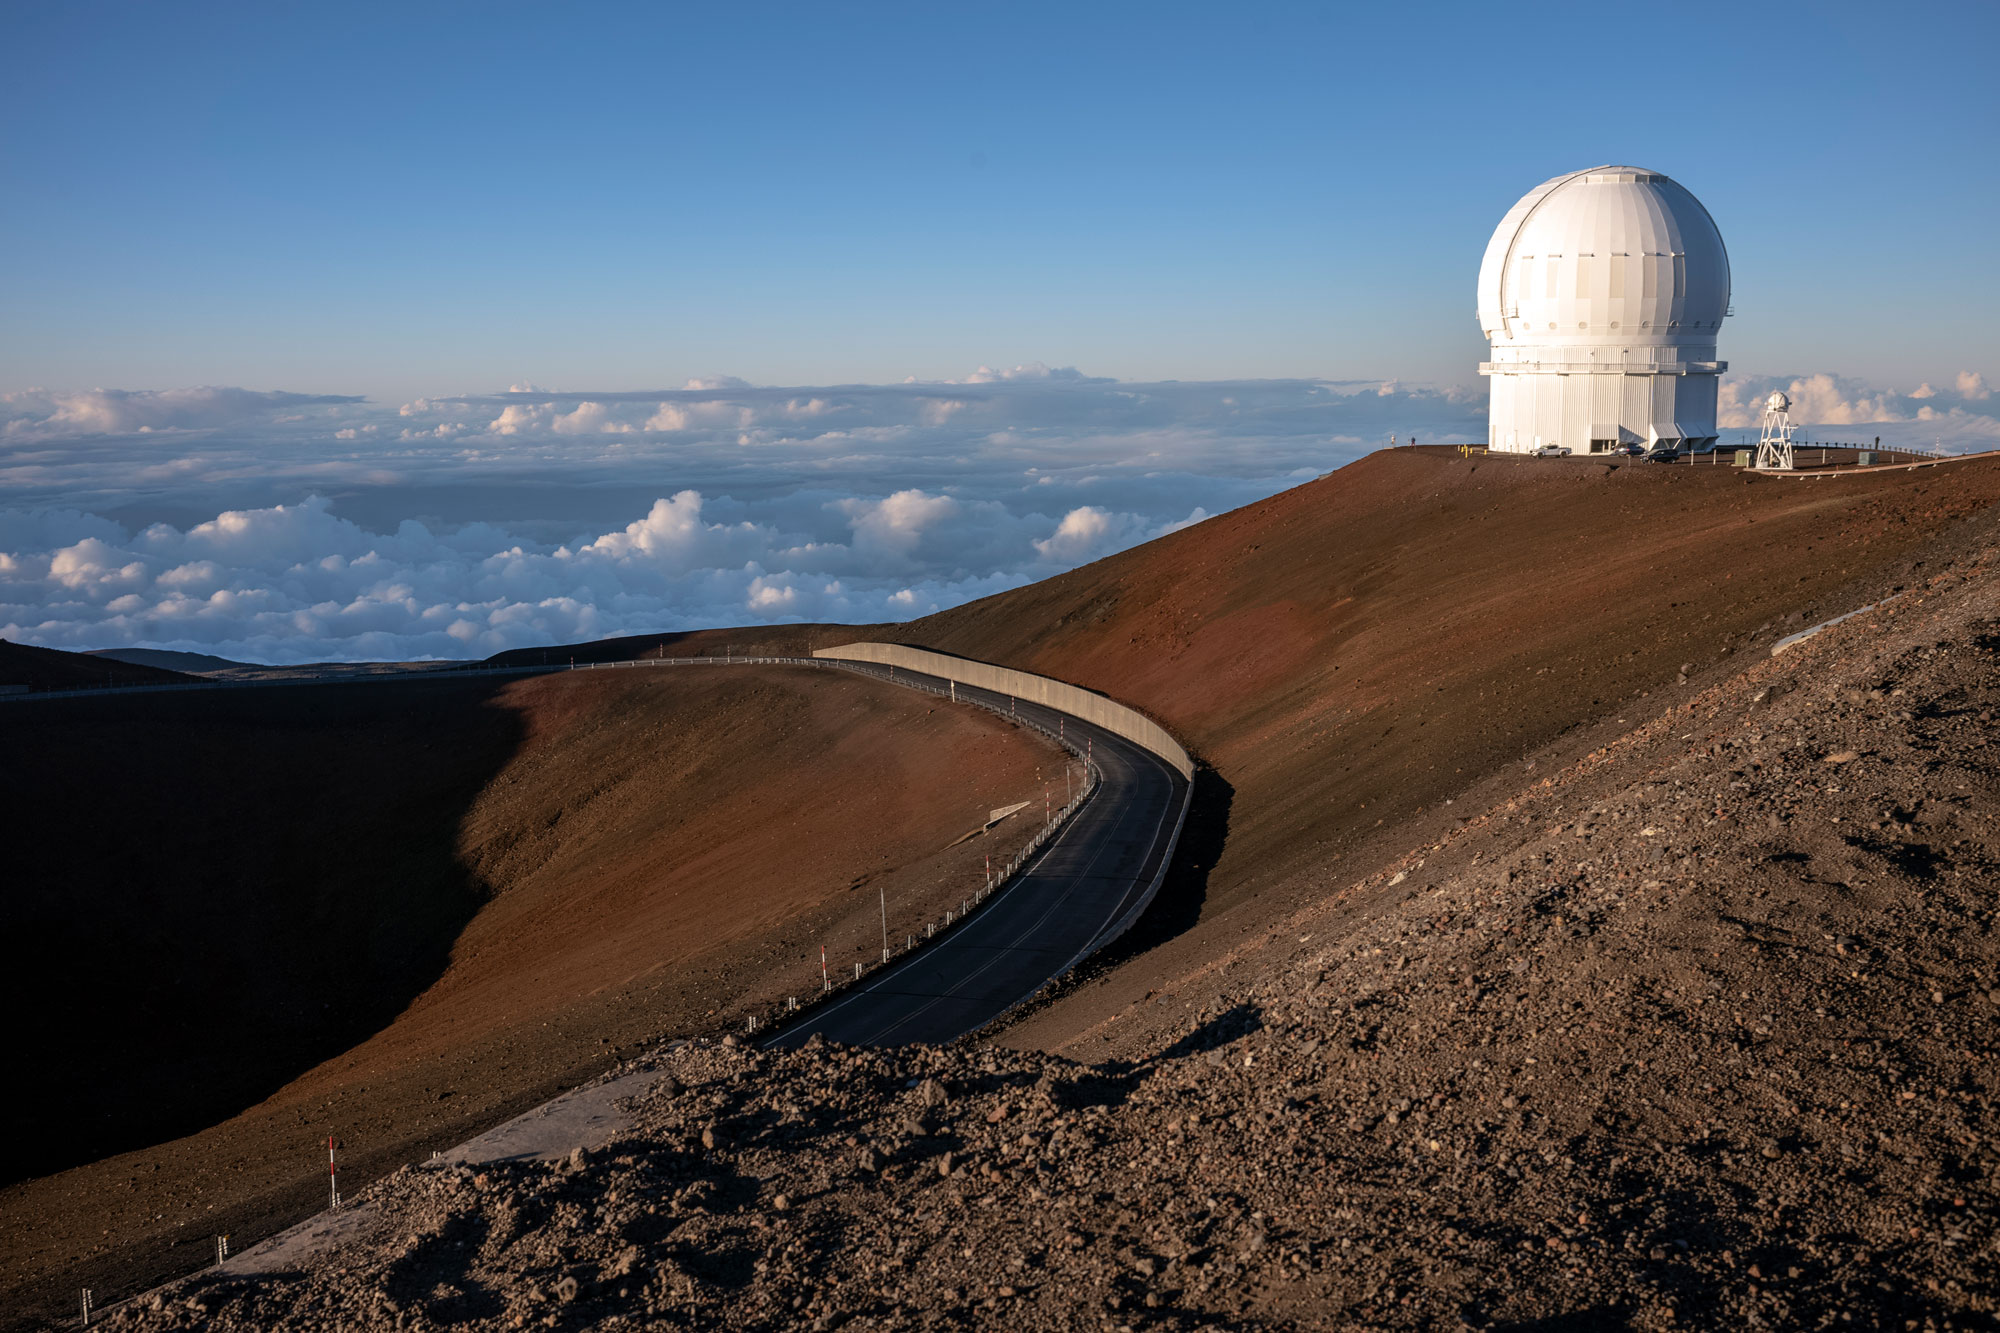 Photograph of the top of Mauna Loa showing the Mauna Loa Observatory. The top of the mountain is dry, brown, and barren of vegetation. The observatory is a cylindrical building topped with a white dome.